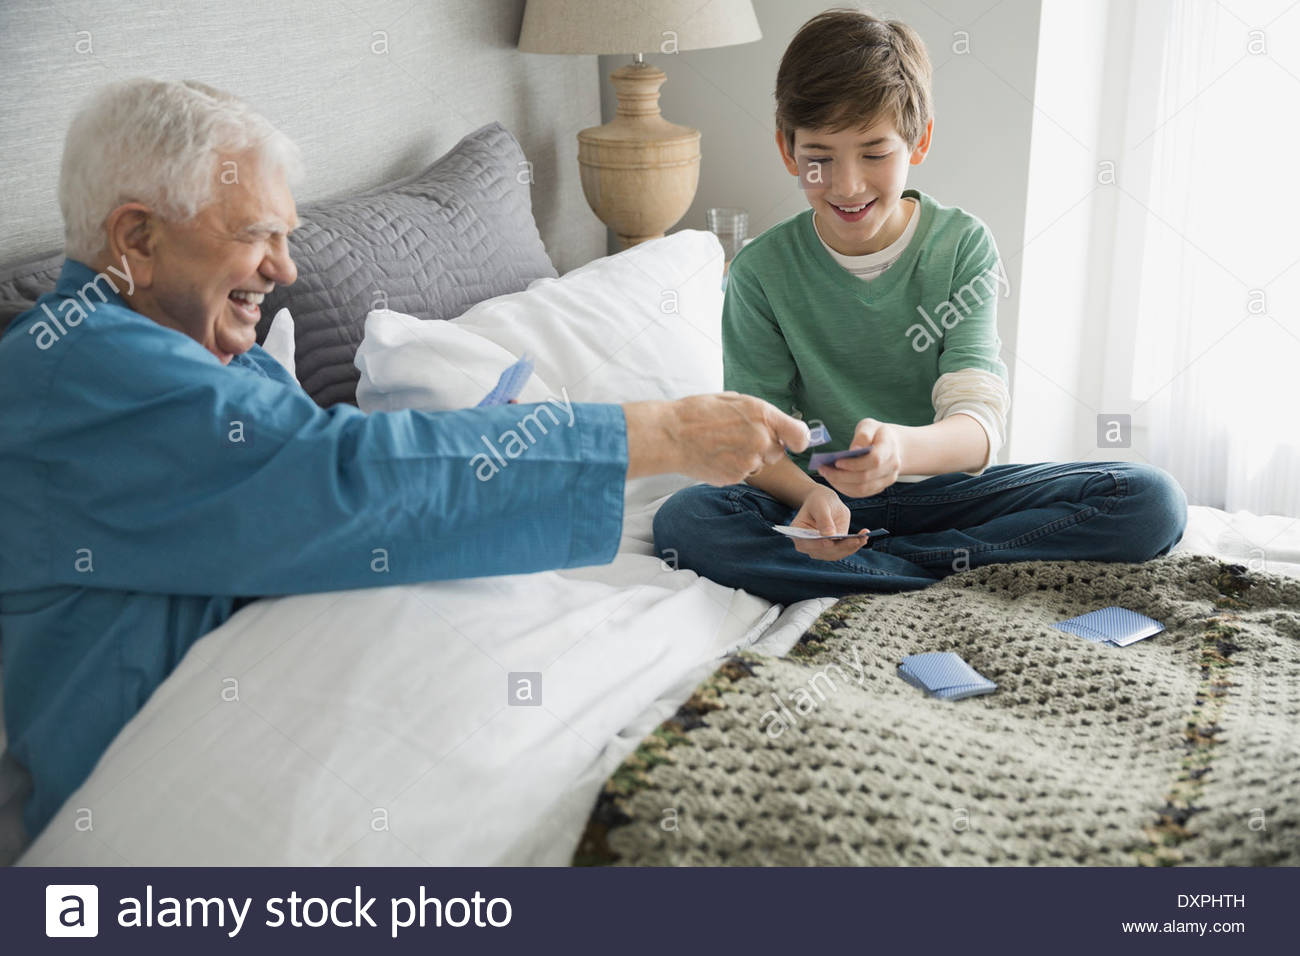 Grandfather and grandson playing cards in bedroom Stock Photo